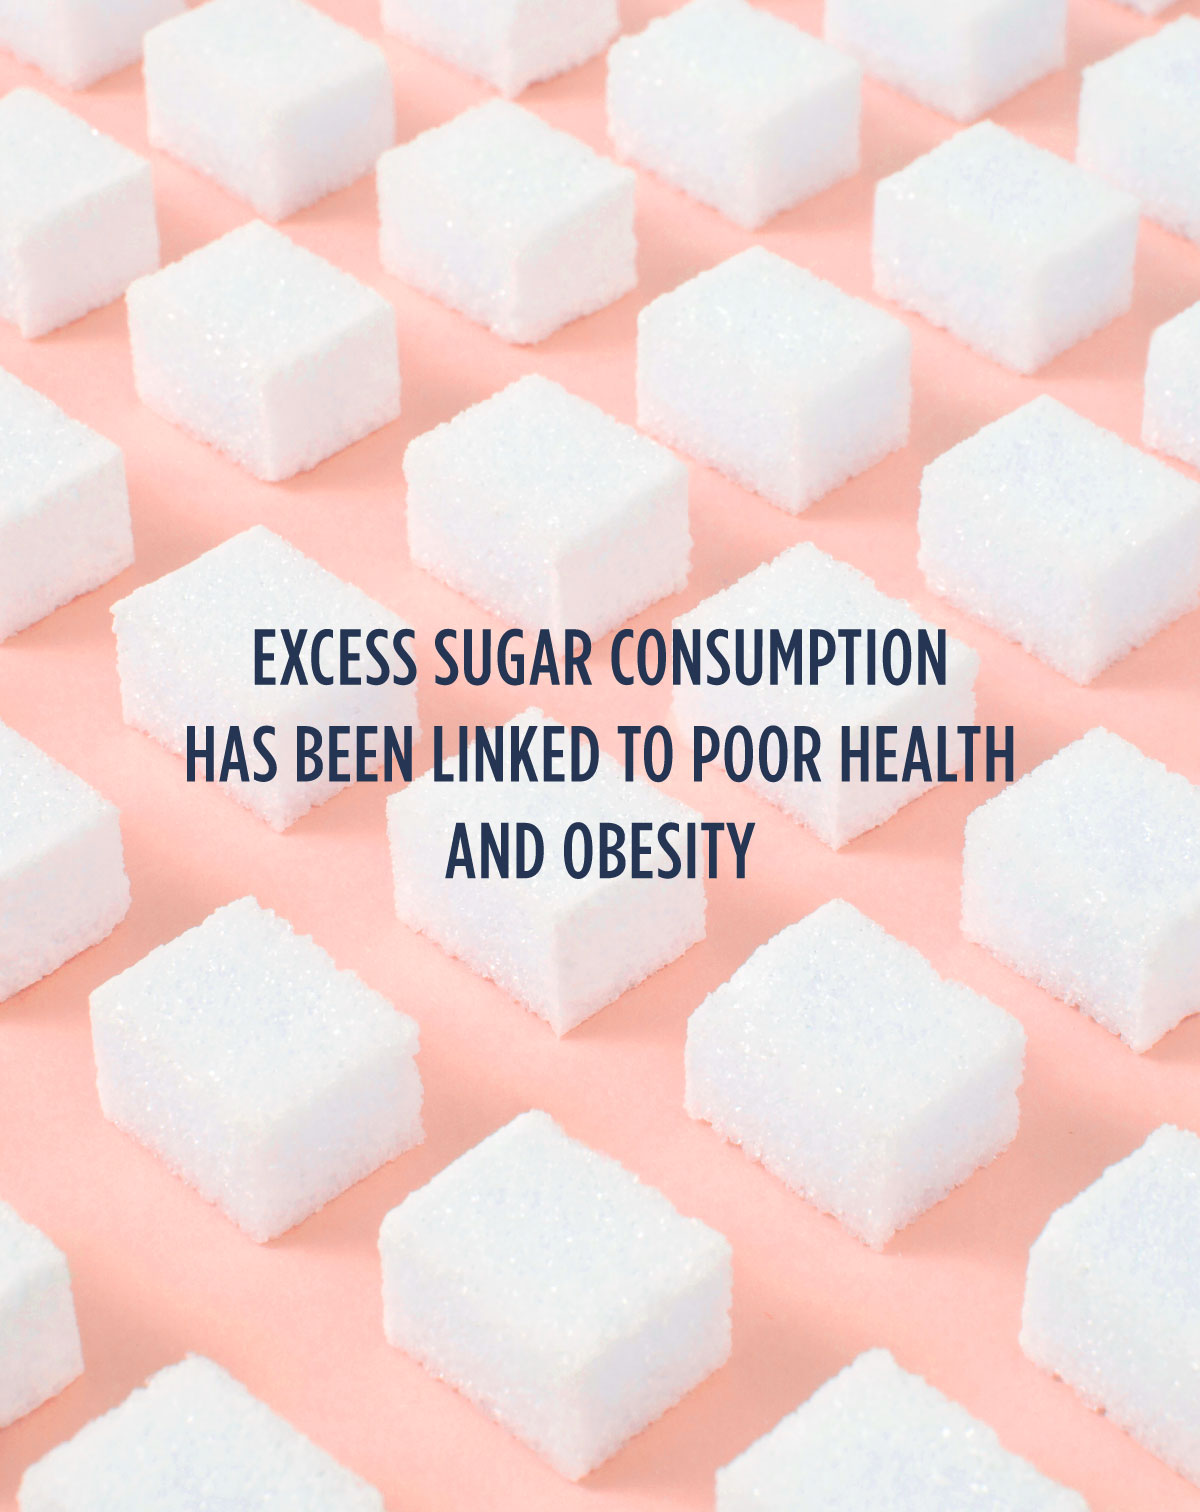 Excess sugar consumption has been linked to poor health and obesity